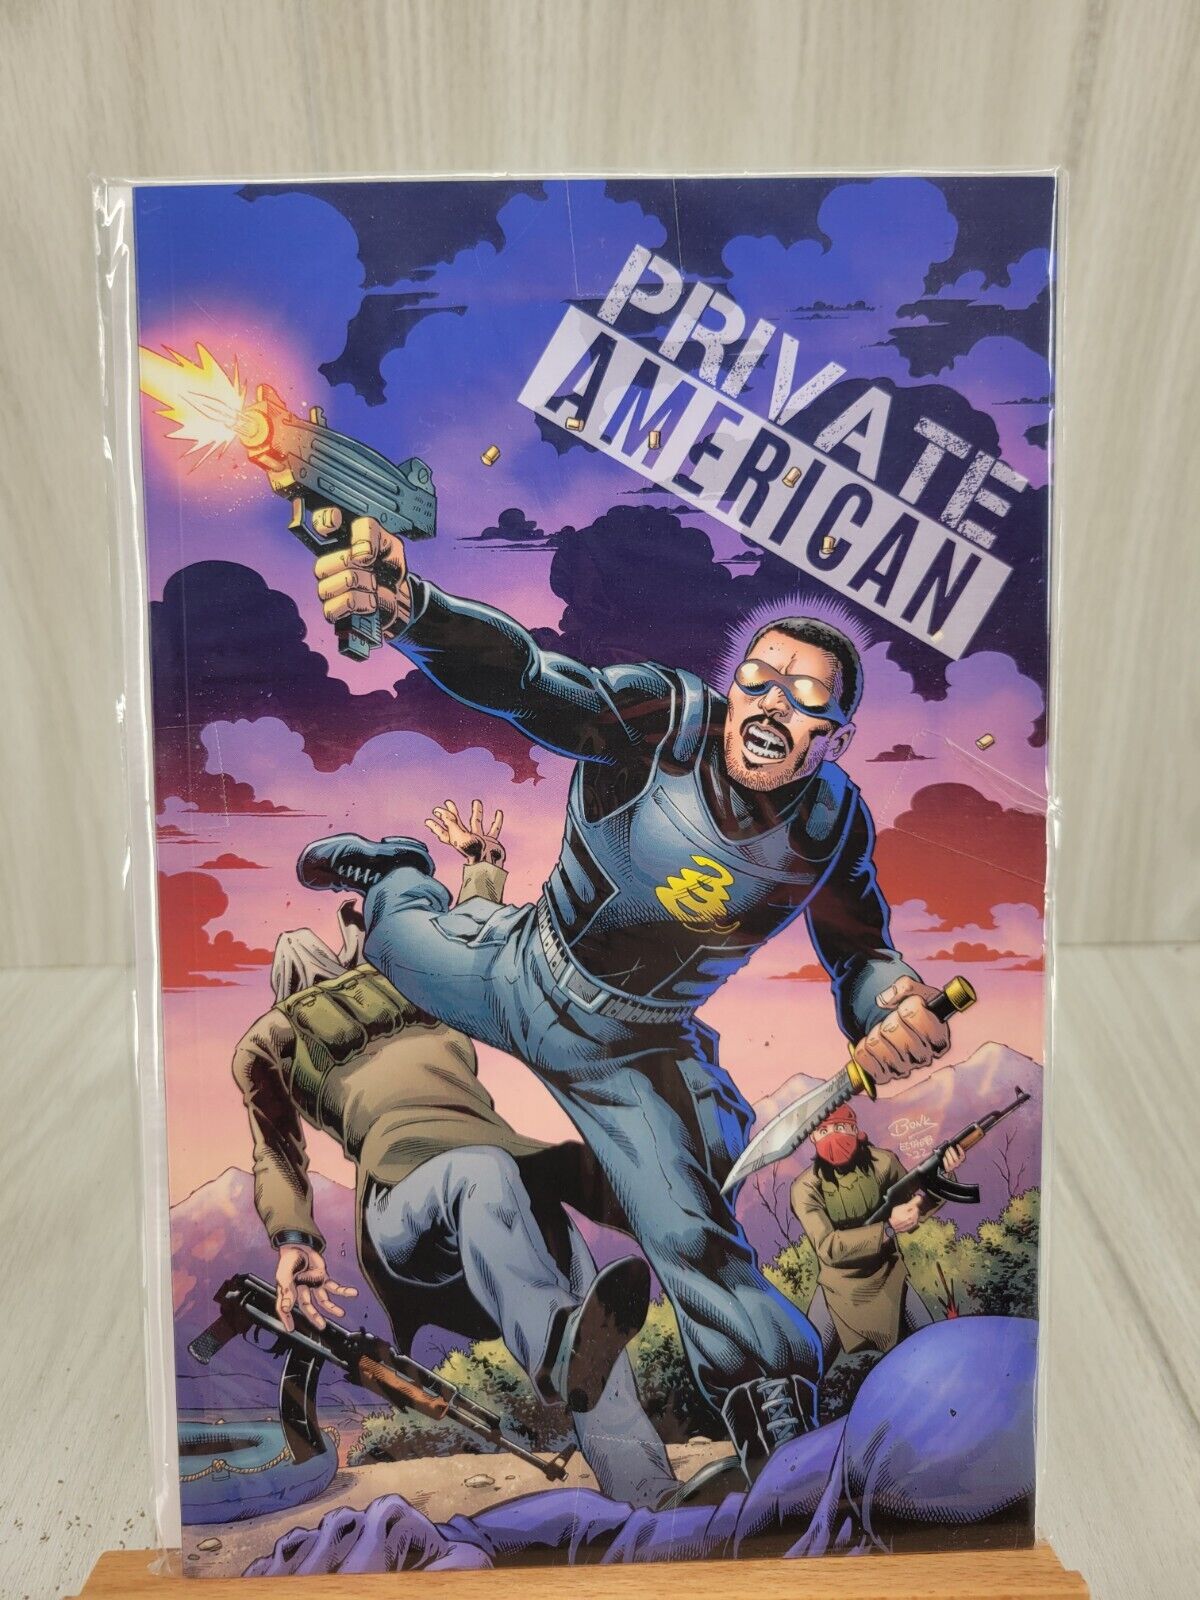 Private American Book by Mike Baron